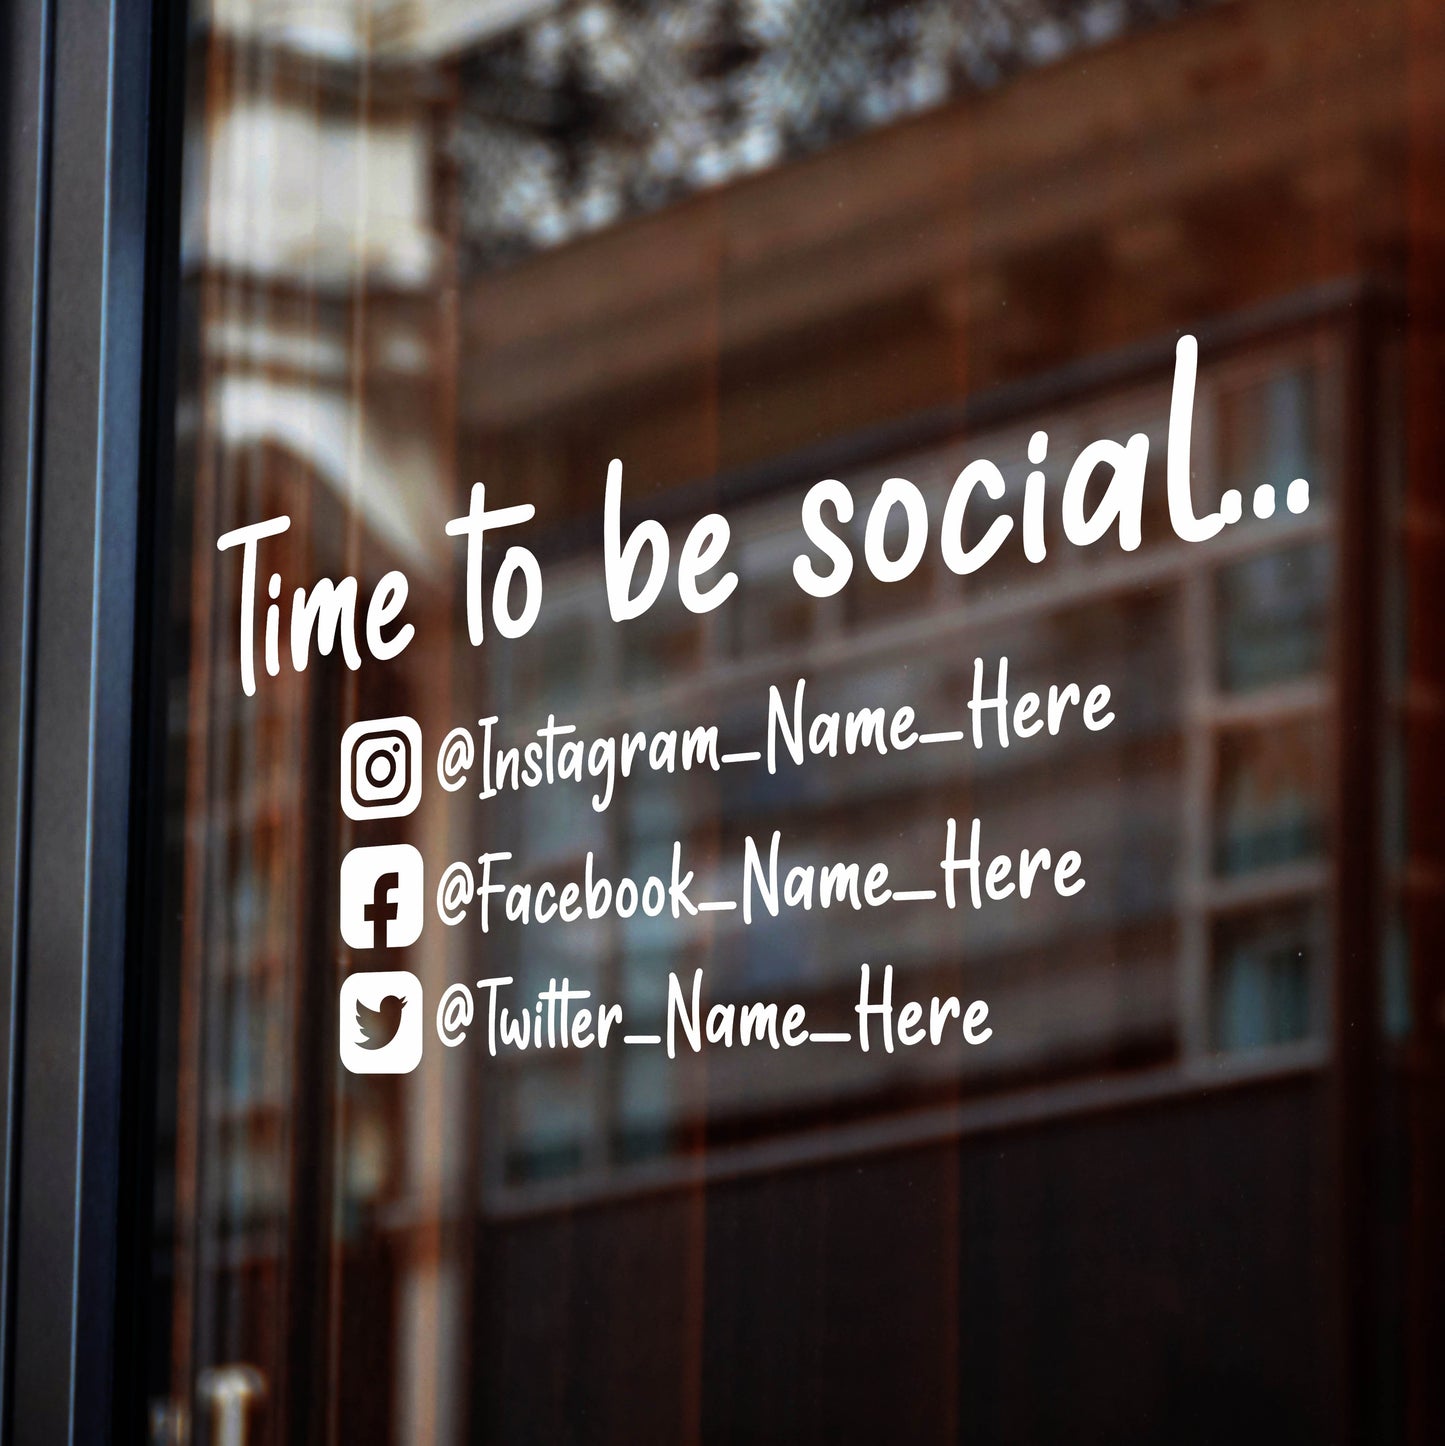 Time To Be Social - Social Media Signage